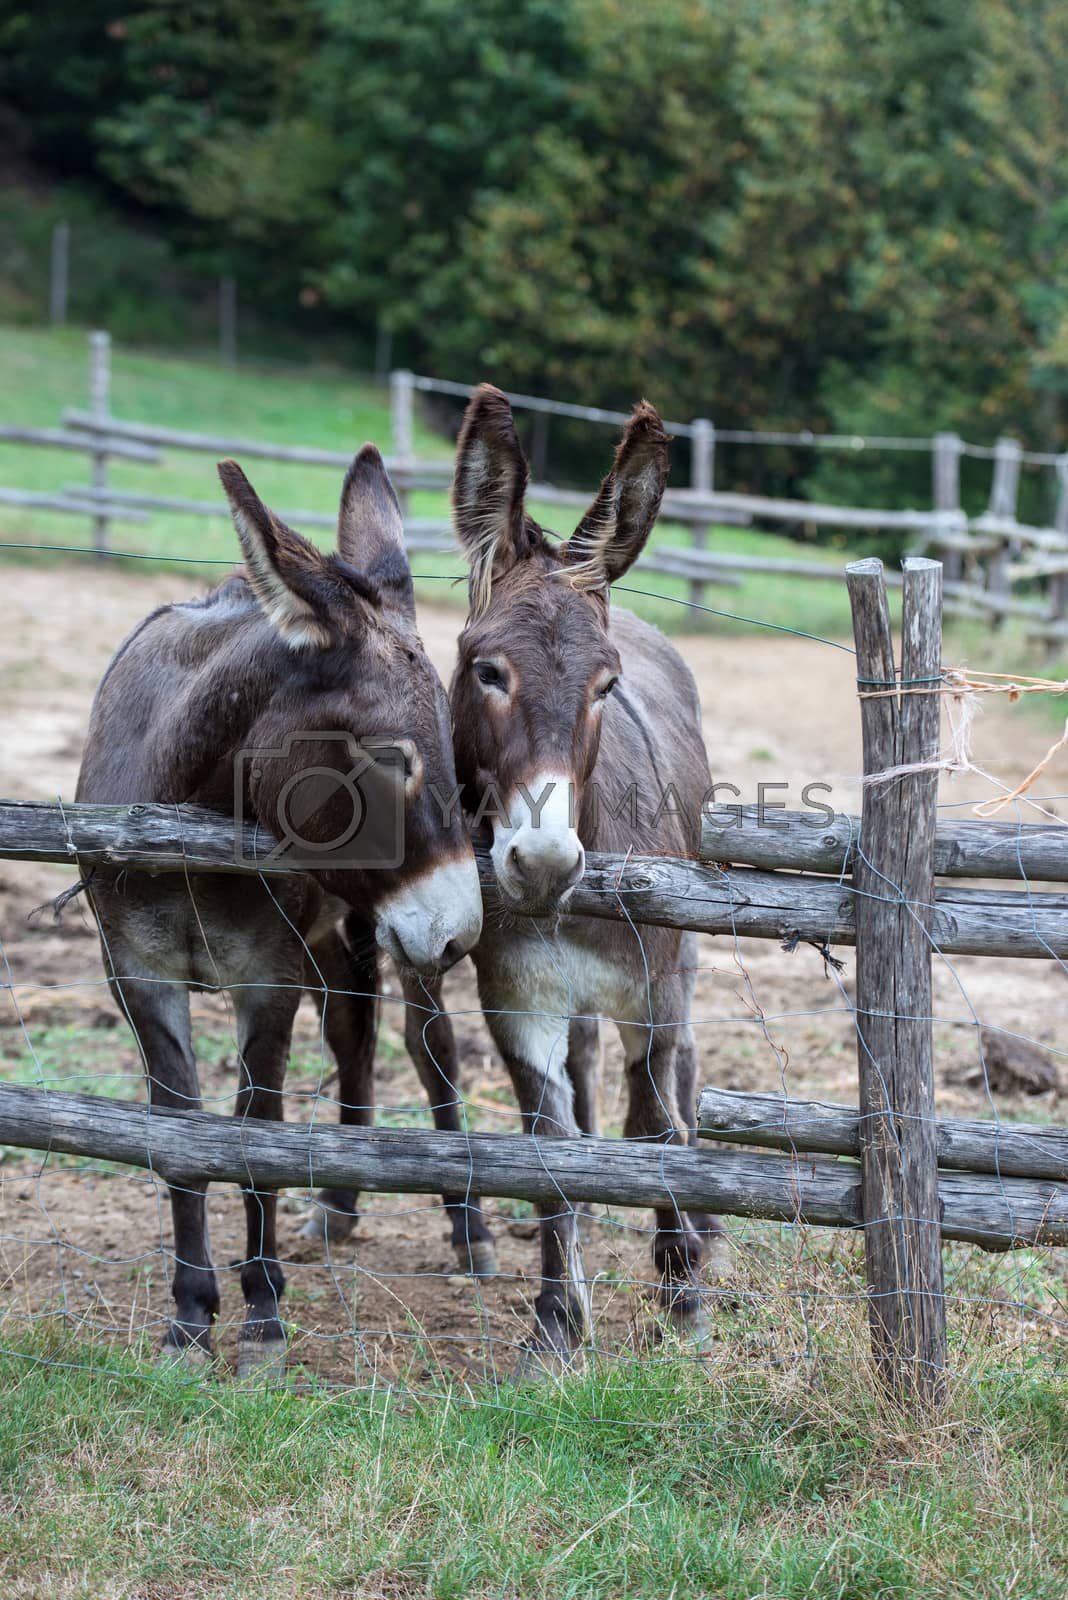 Royalty free image of pair of donkeys by giovannicaito